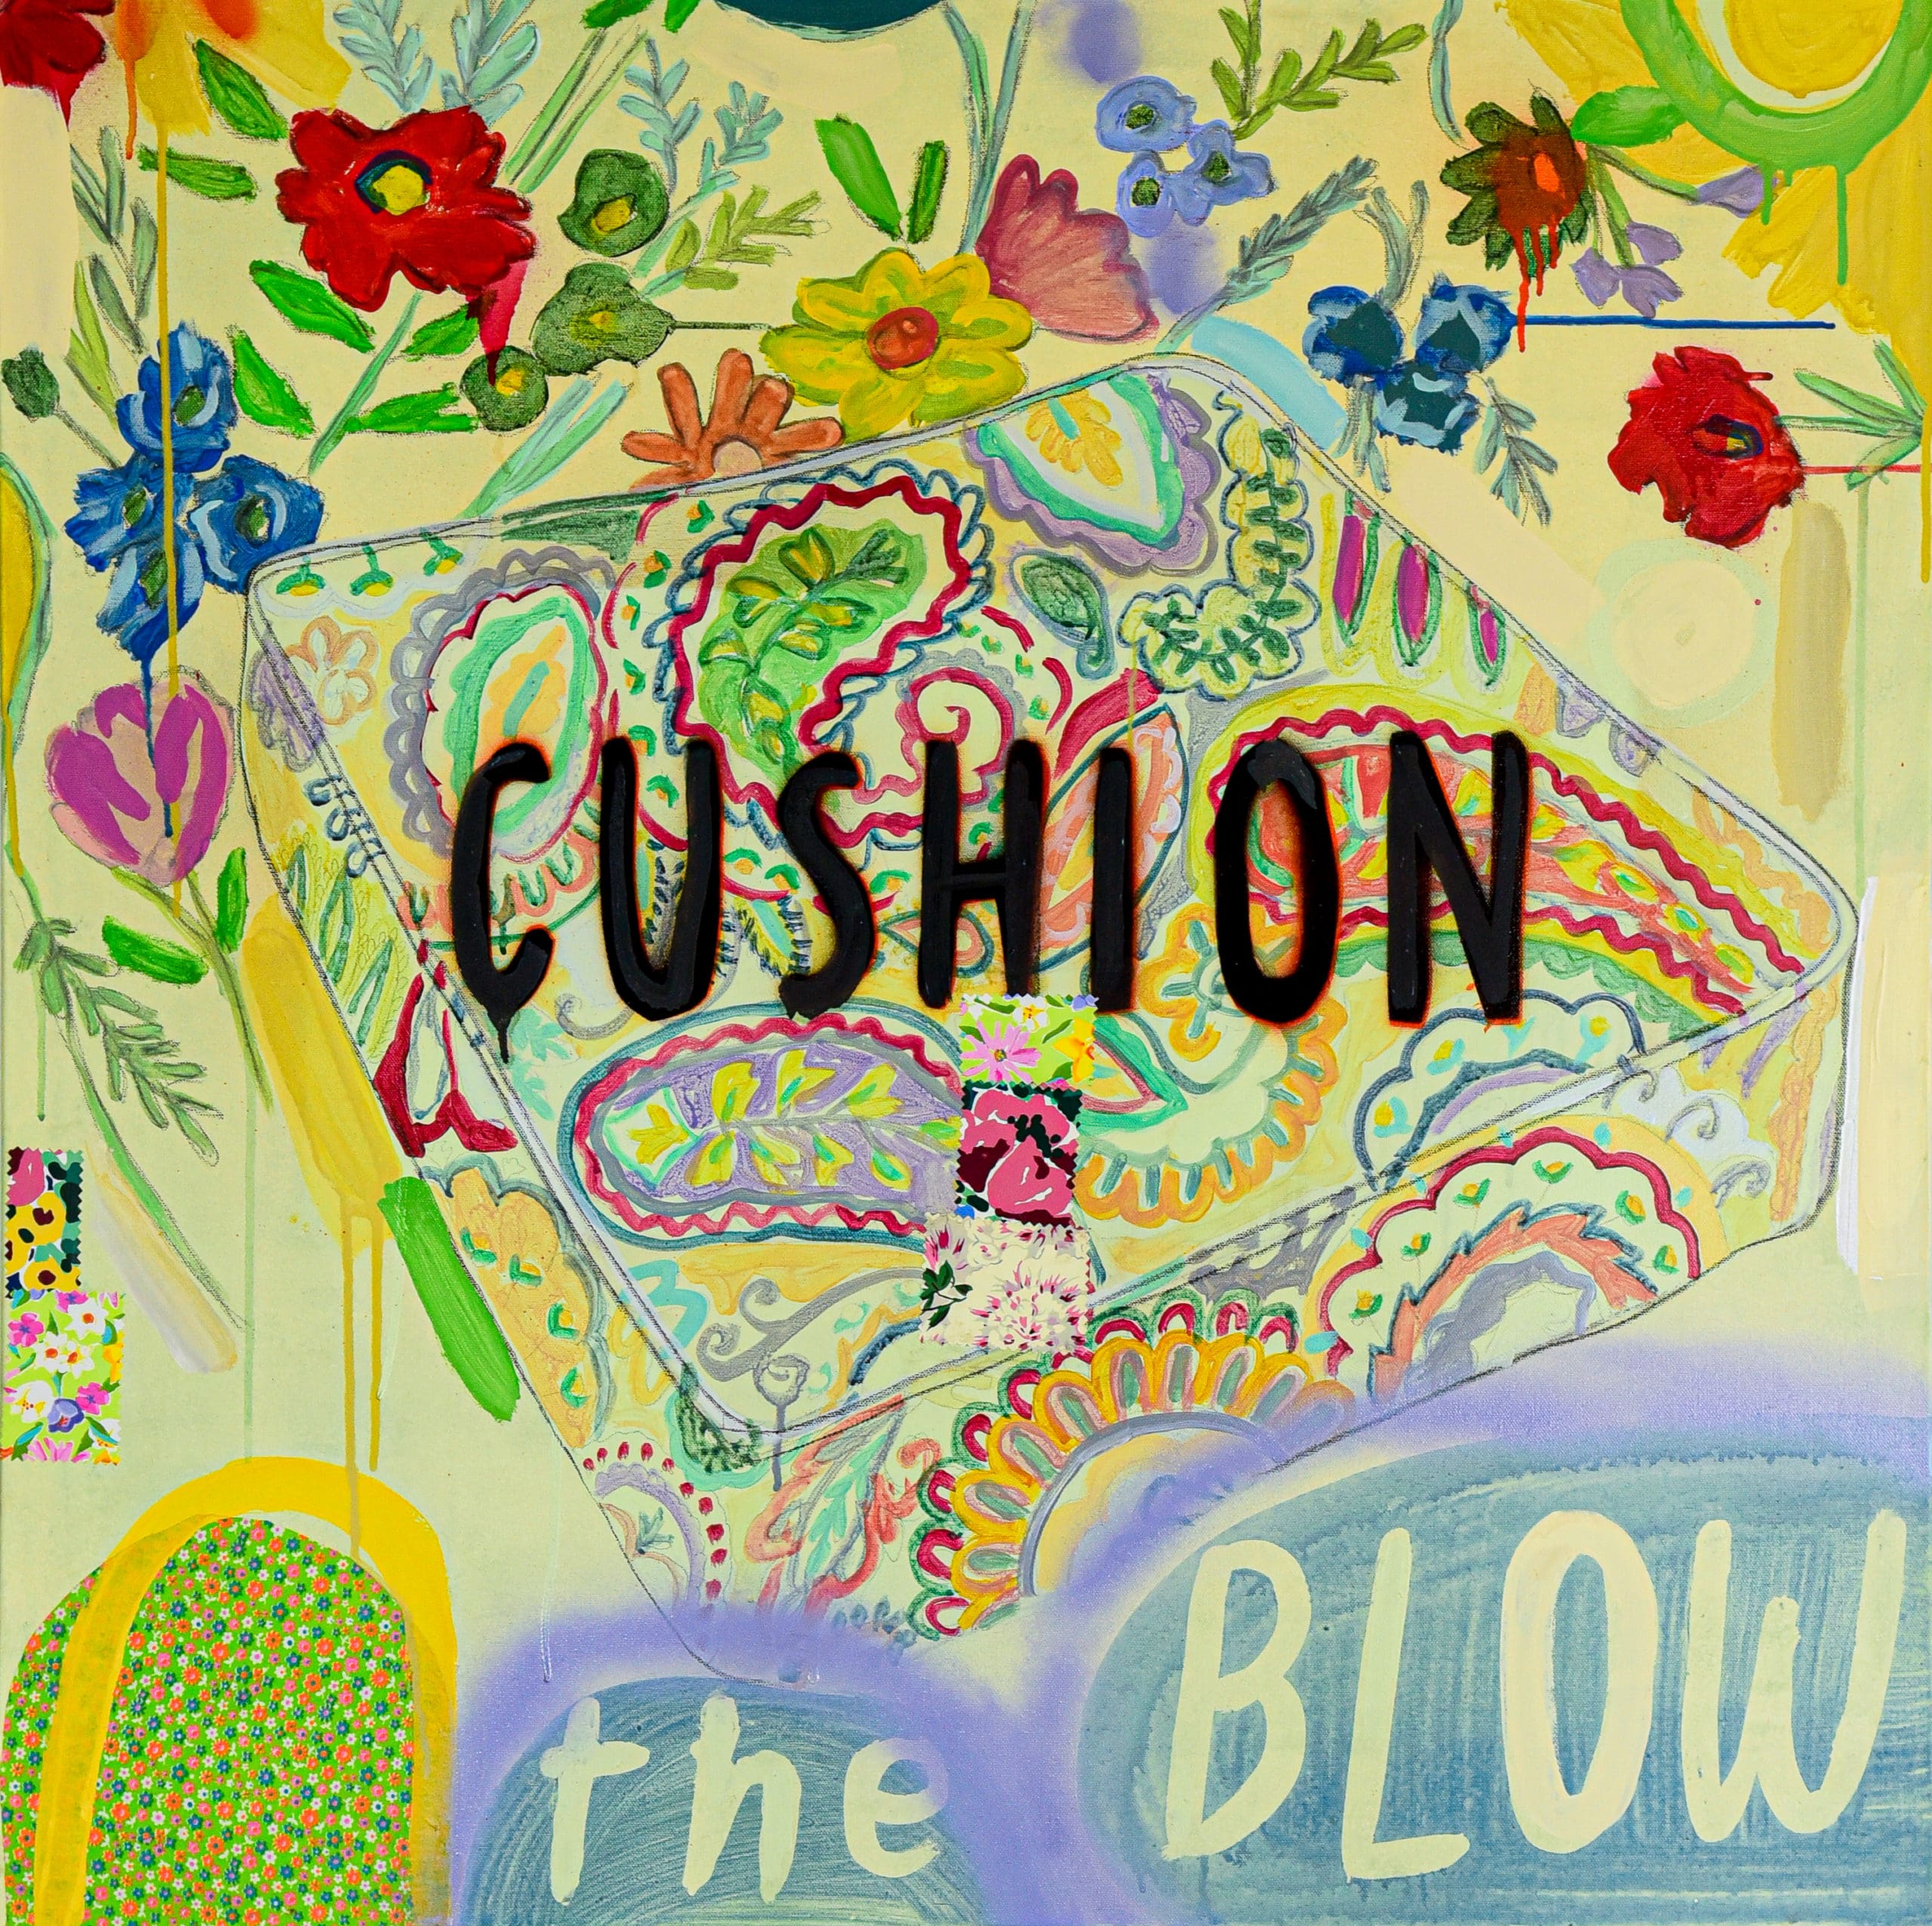 Liz Maugans. Cushion BLOWS, 2020. Courtesy of HEDGE Gallery